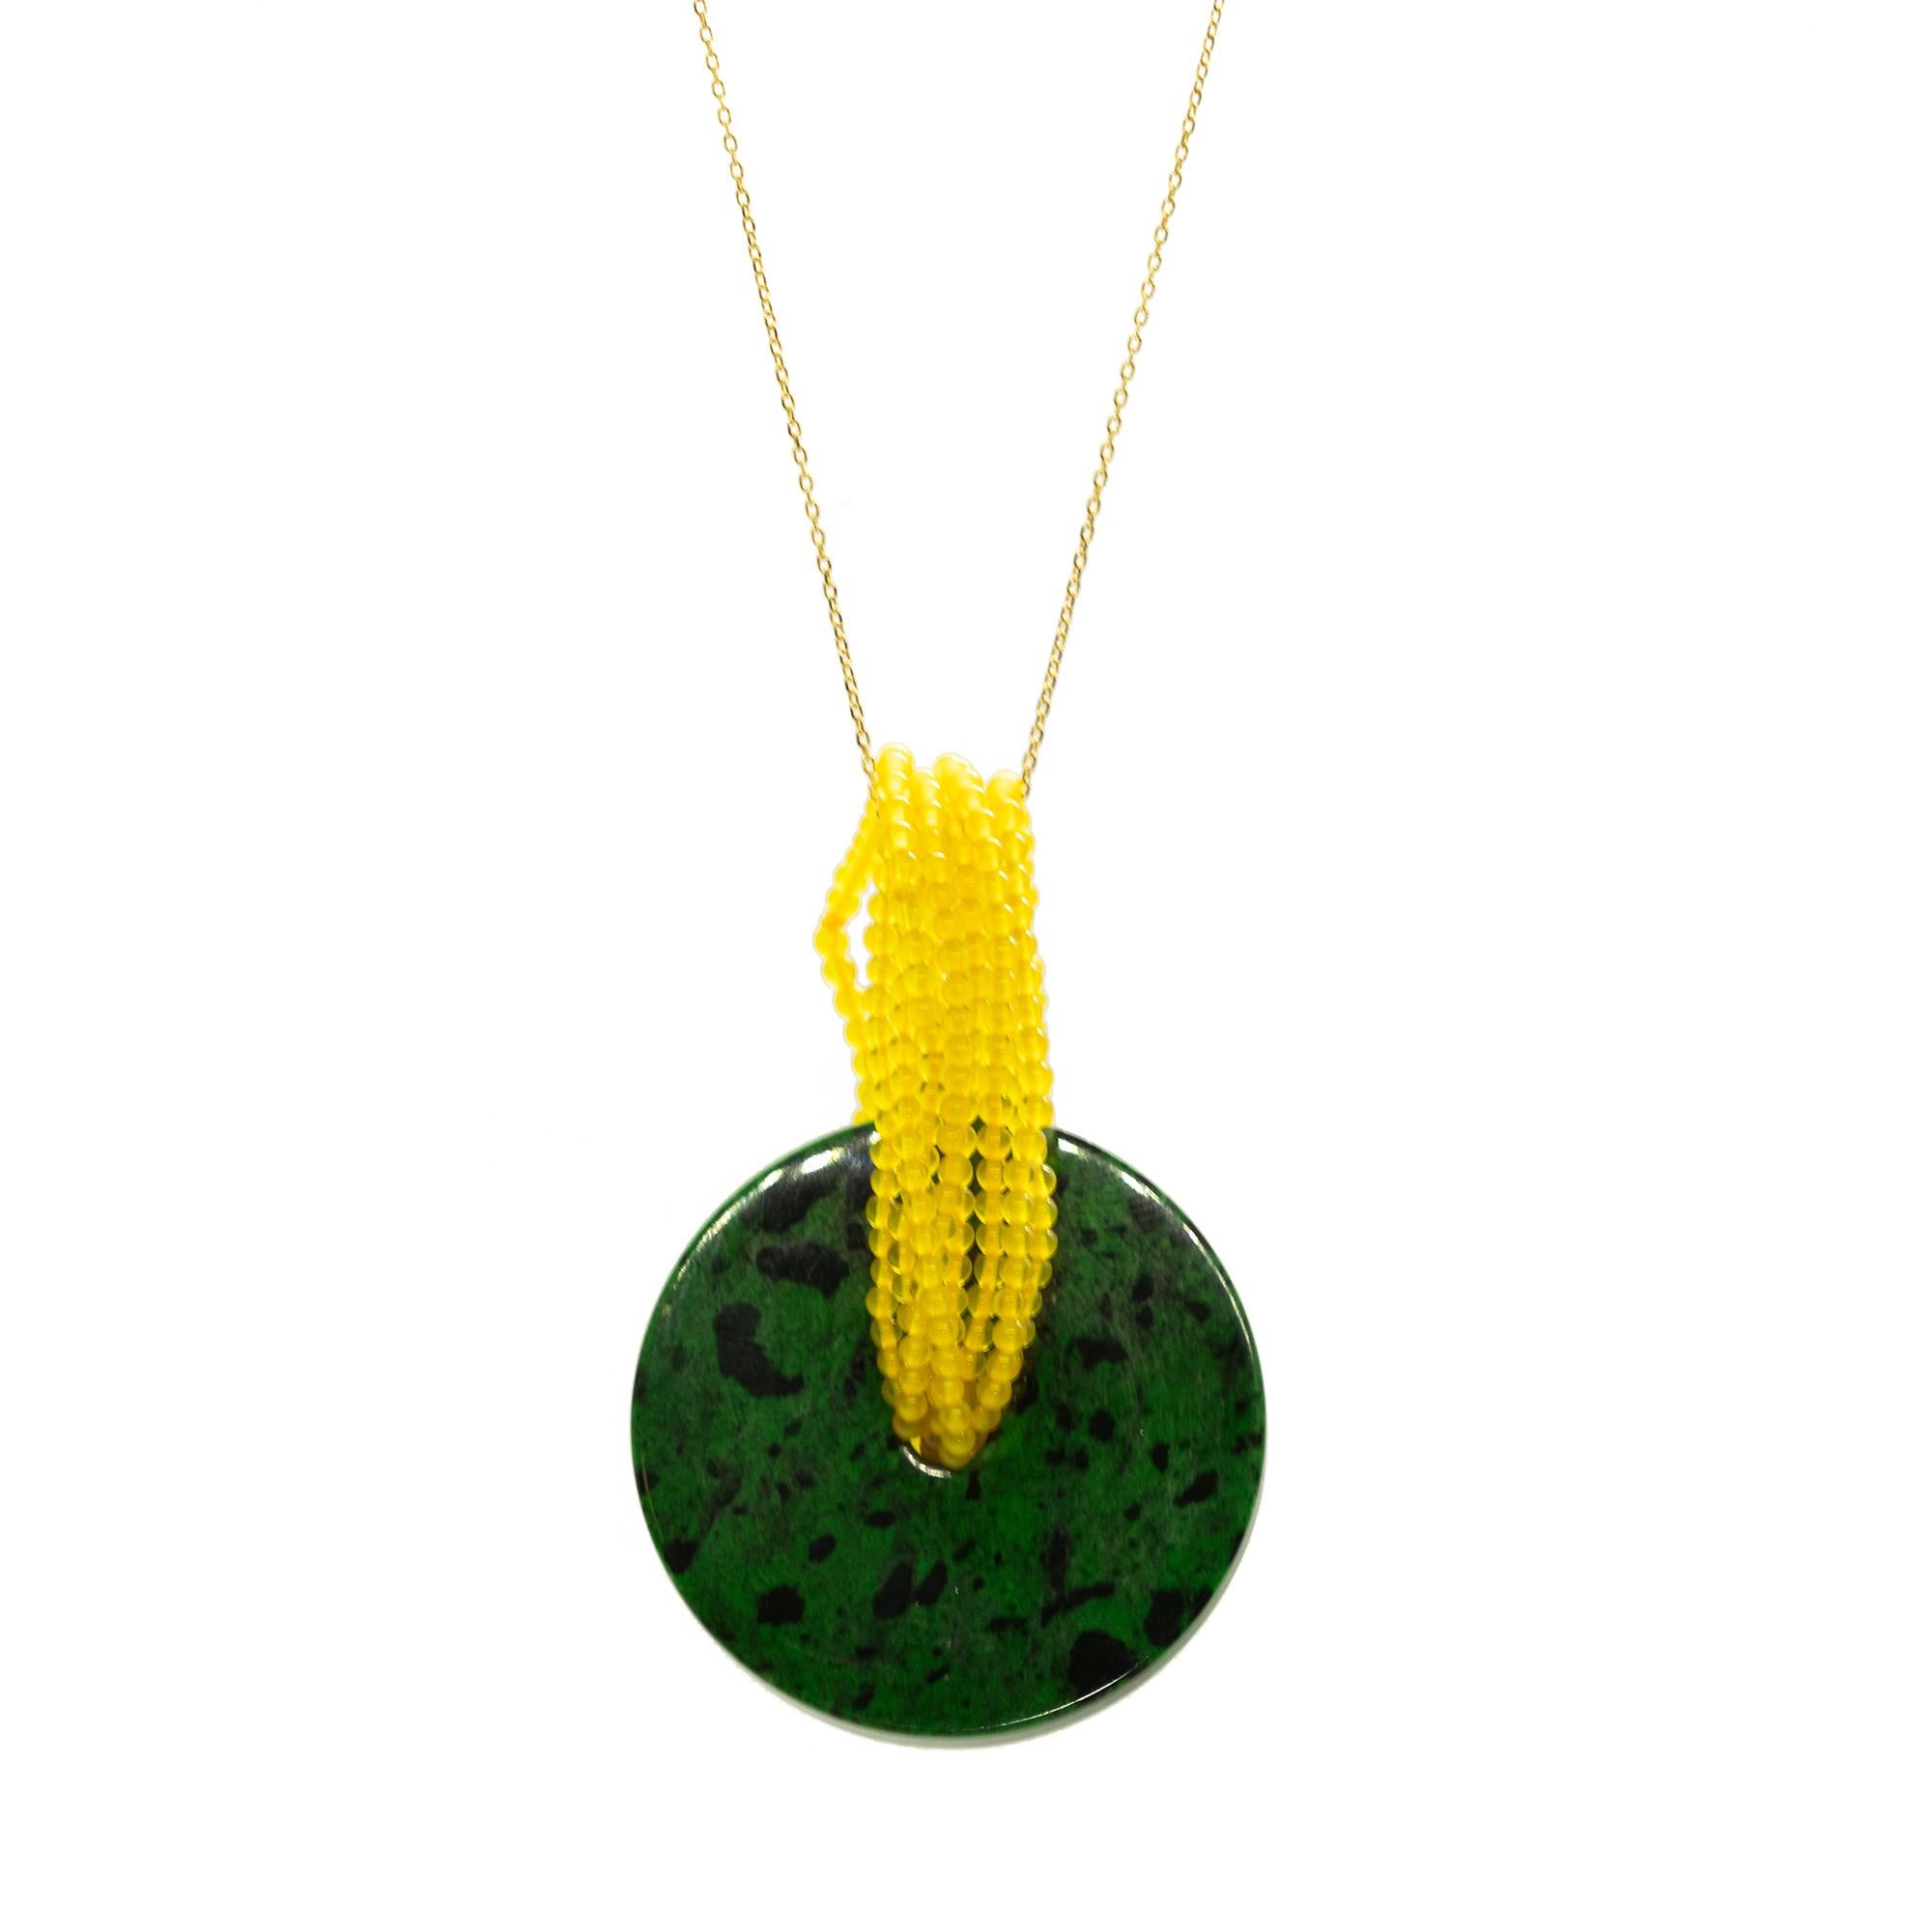 One of a kind pendant necklace. A unique design where contemporary jewellery meets the highest quality precious stones.

Exclusive jewellery, suitable for an extroverted and bold look.

• 18 karat yellow gold (750 stamp)
• Omphacite Jadeite Jade